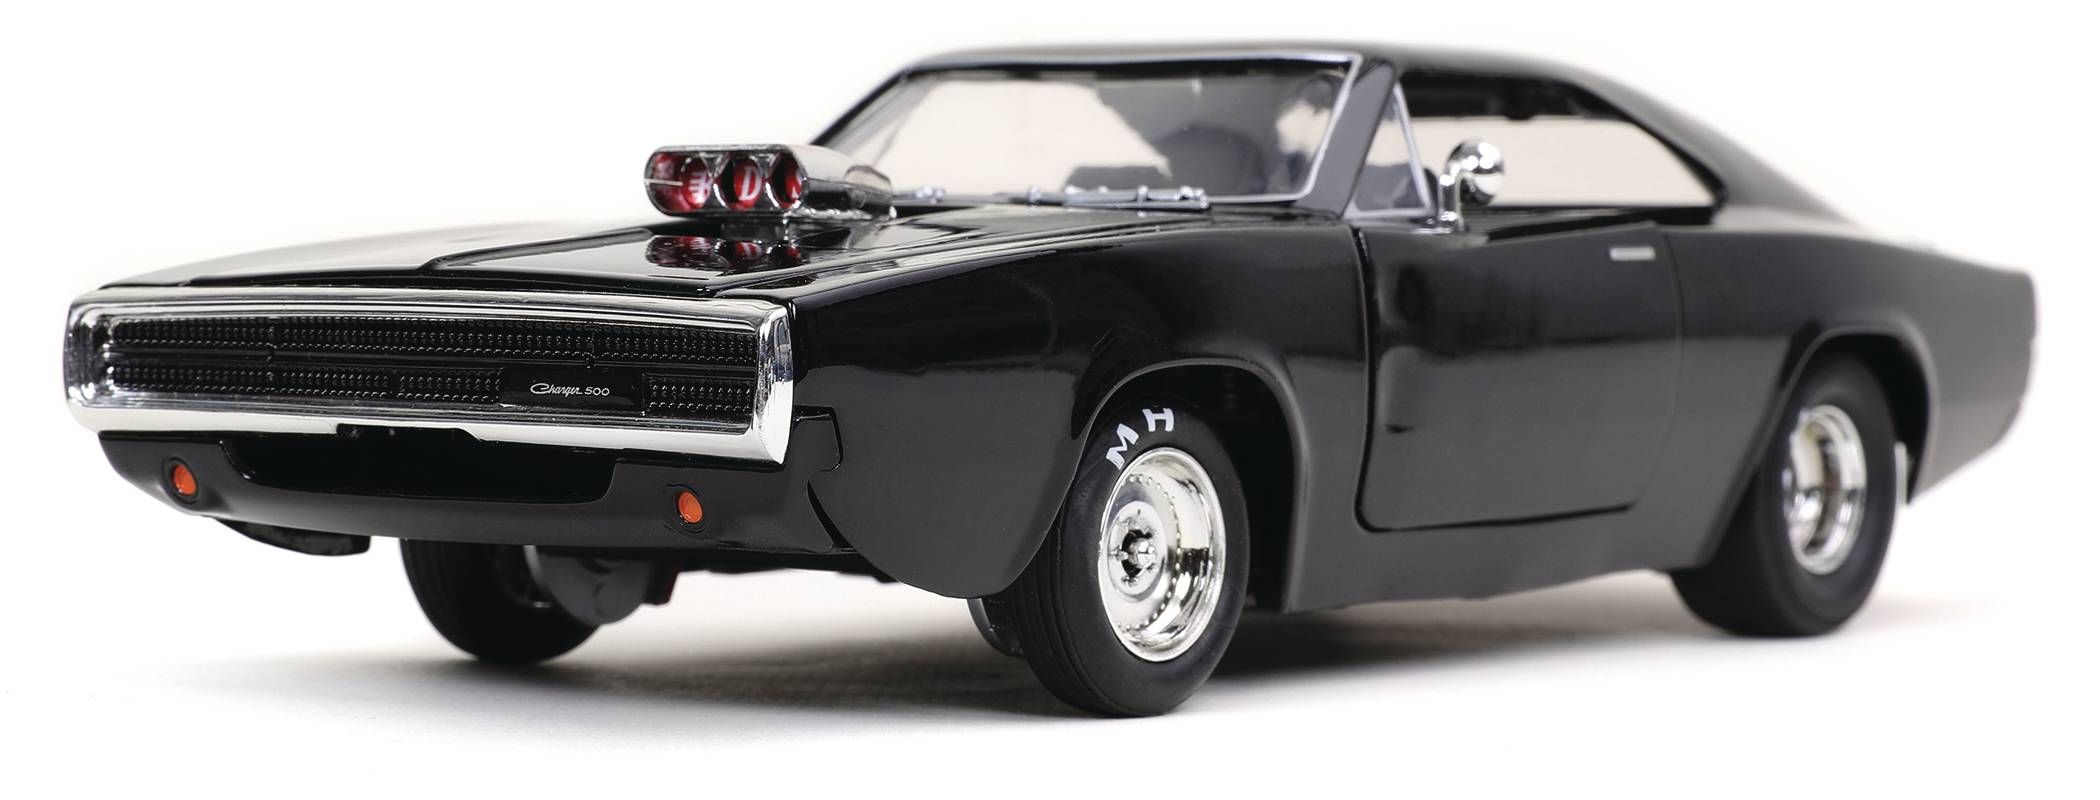 FF9 DOMS 1327 DODGE CHARGER 1/24 VEHICLE